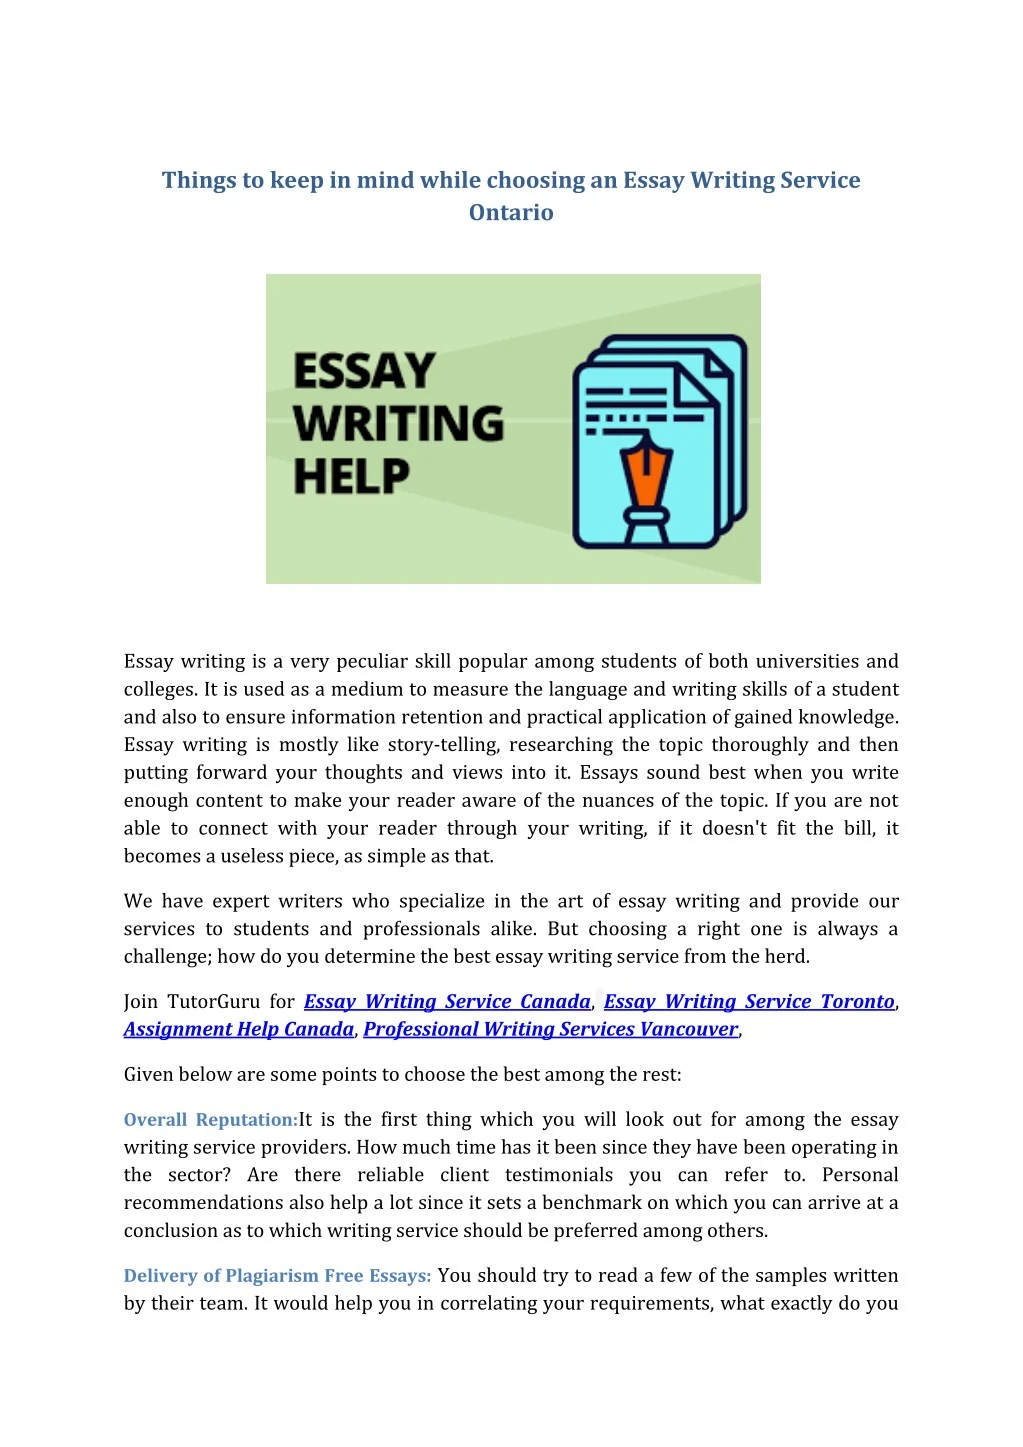 things to keep in mind while choosing an essay